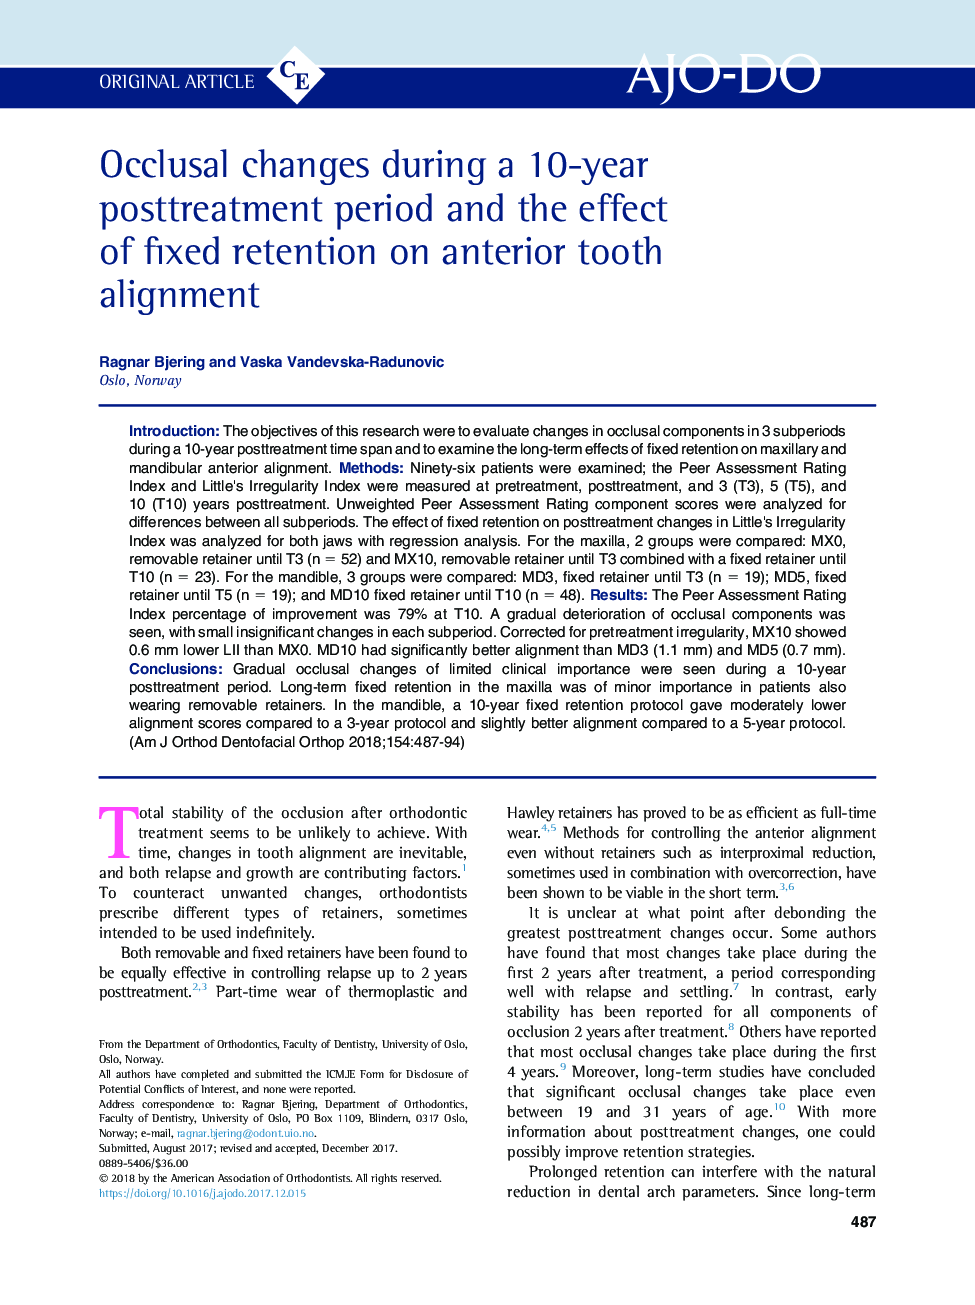 Occlusal changes during a 10-year posttreatment period and the effect of fixed retention on anterior tooth alignment